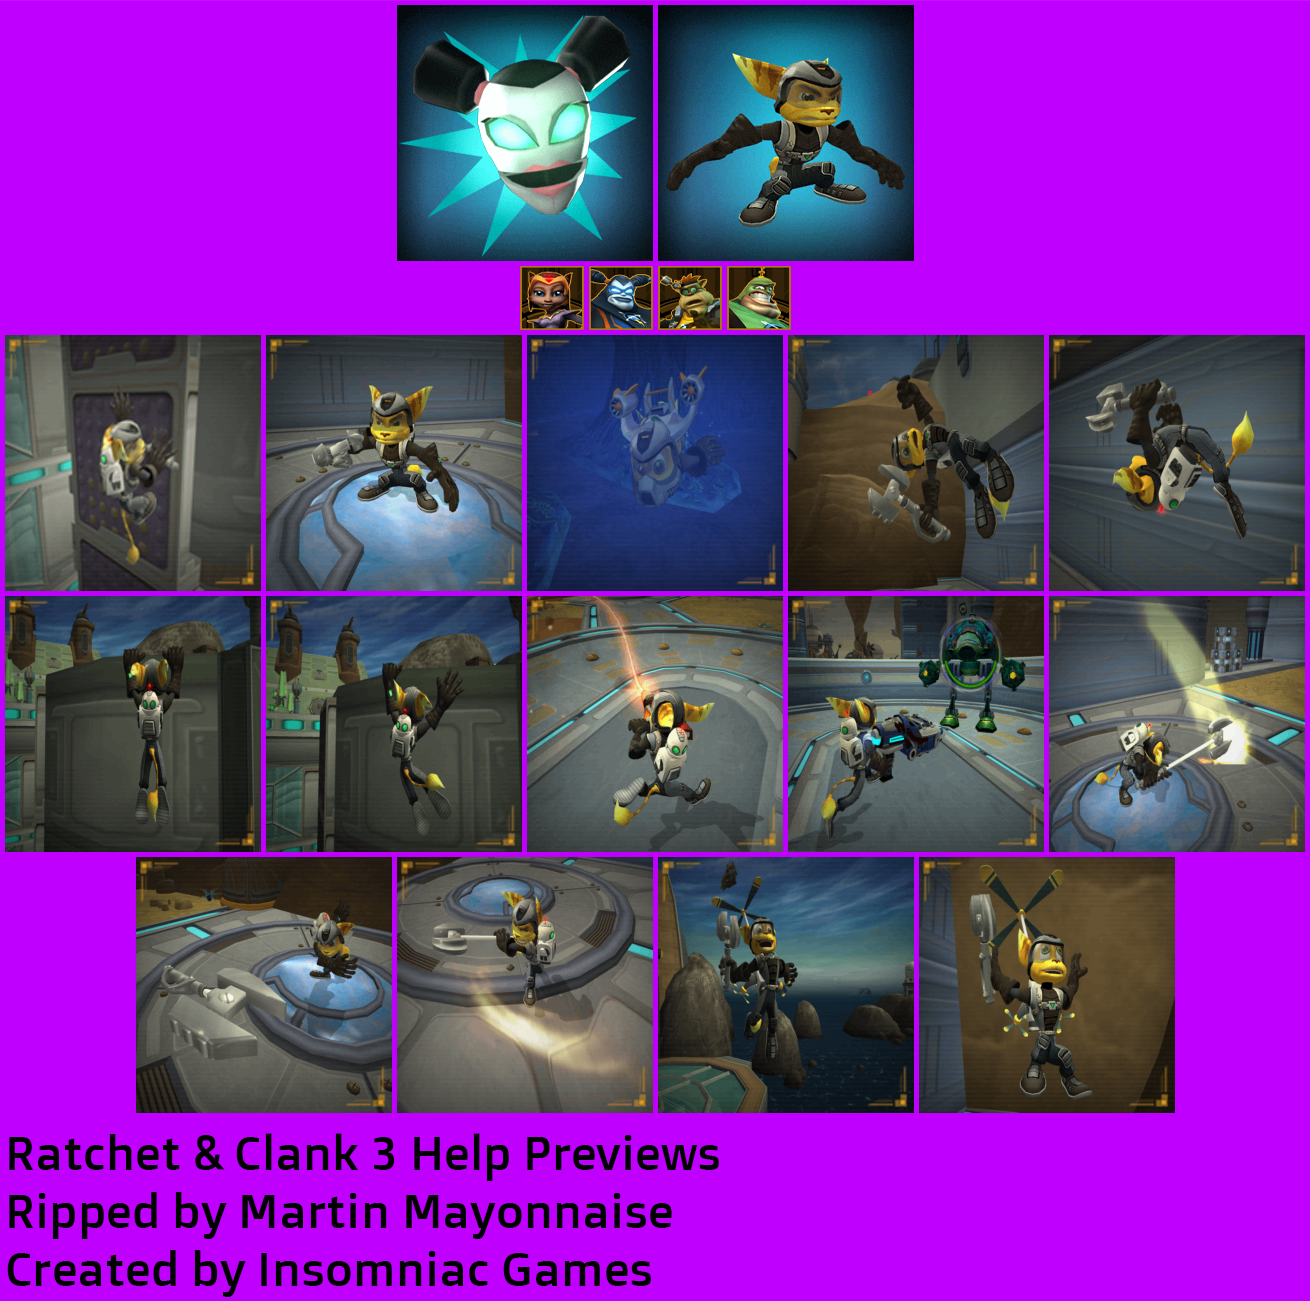 Ratchet & Clank 3: Up Your Arsenal - Help Menu Previews